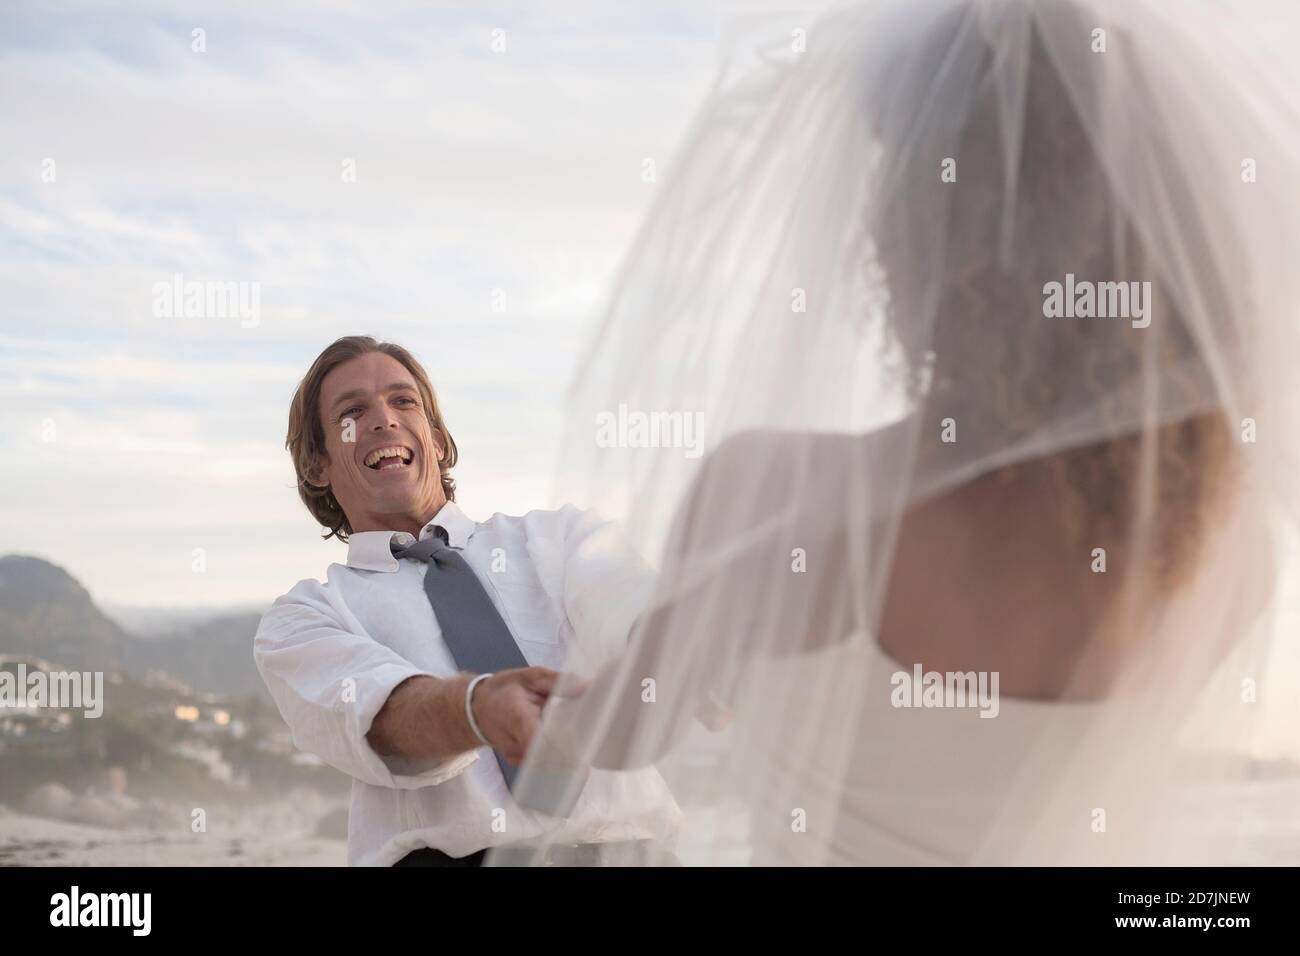 Carefree bridegroom holding hands of bride against sky at sunset Stock Photo